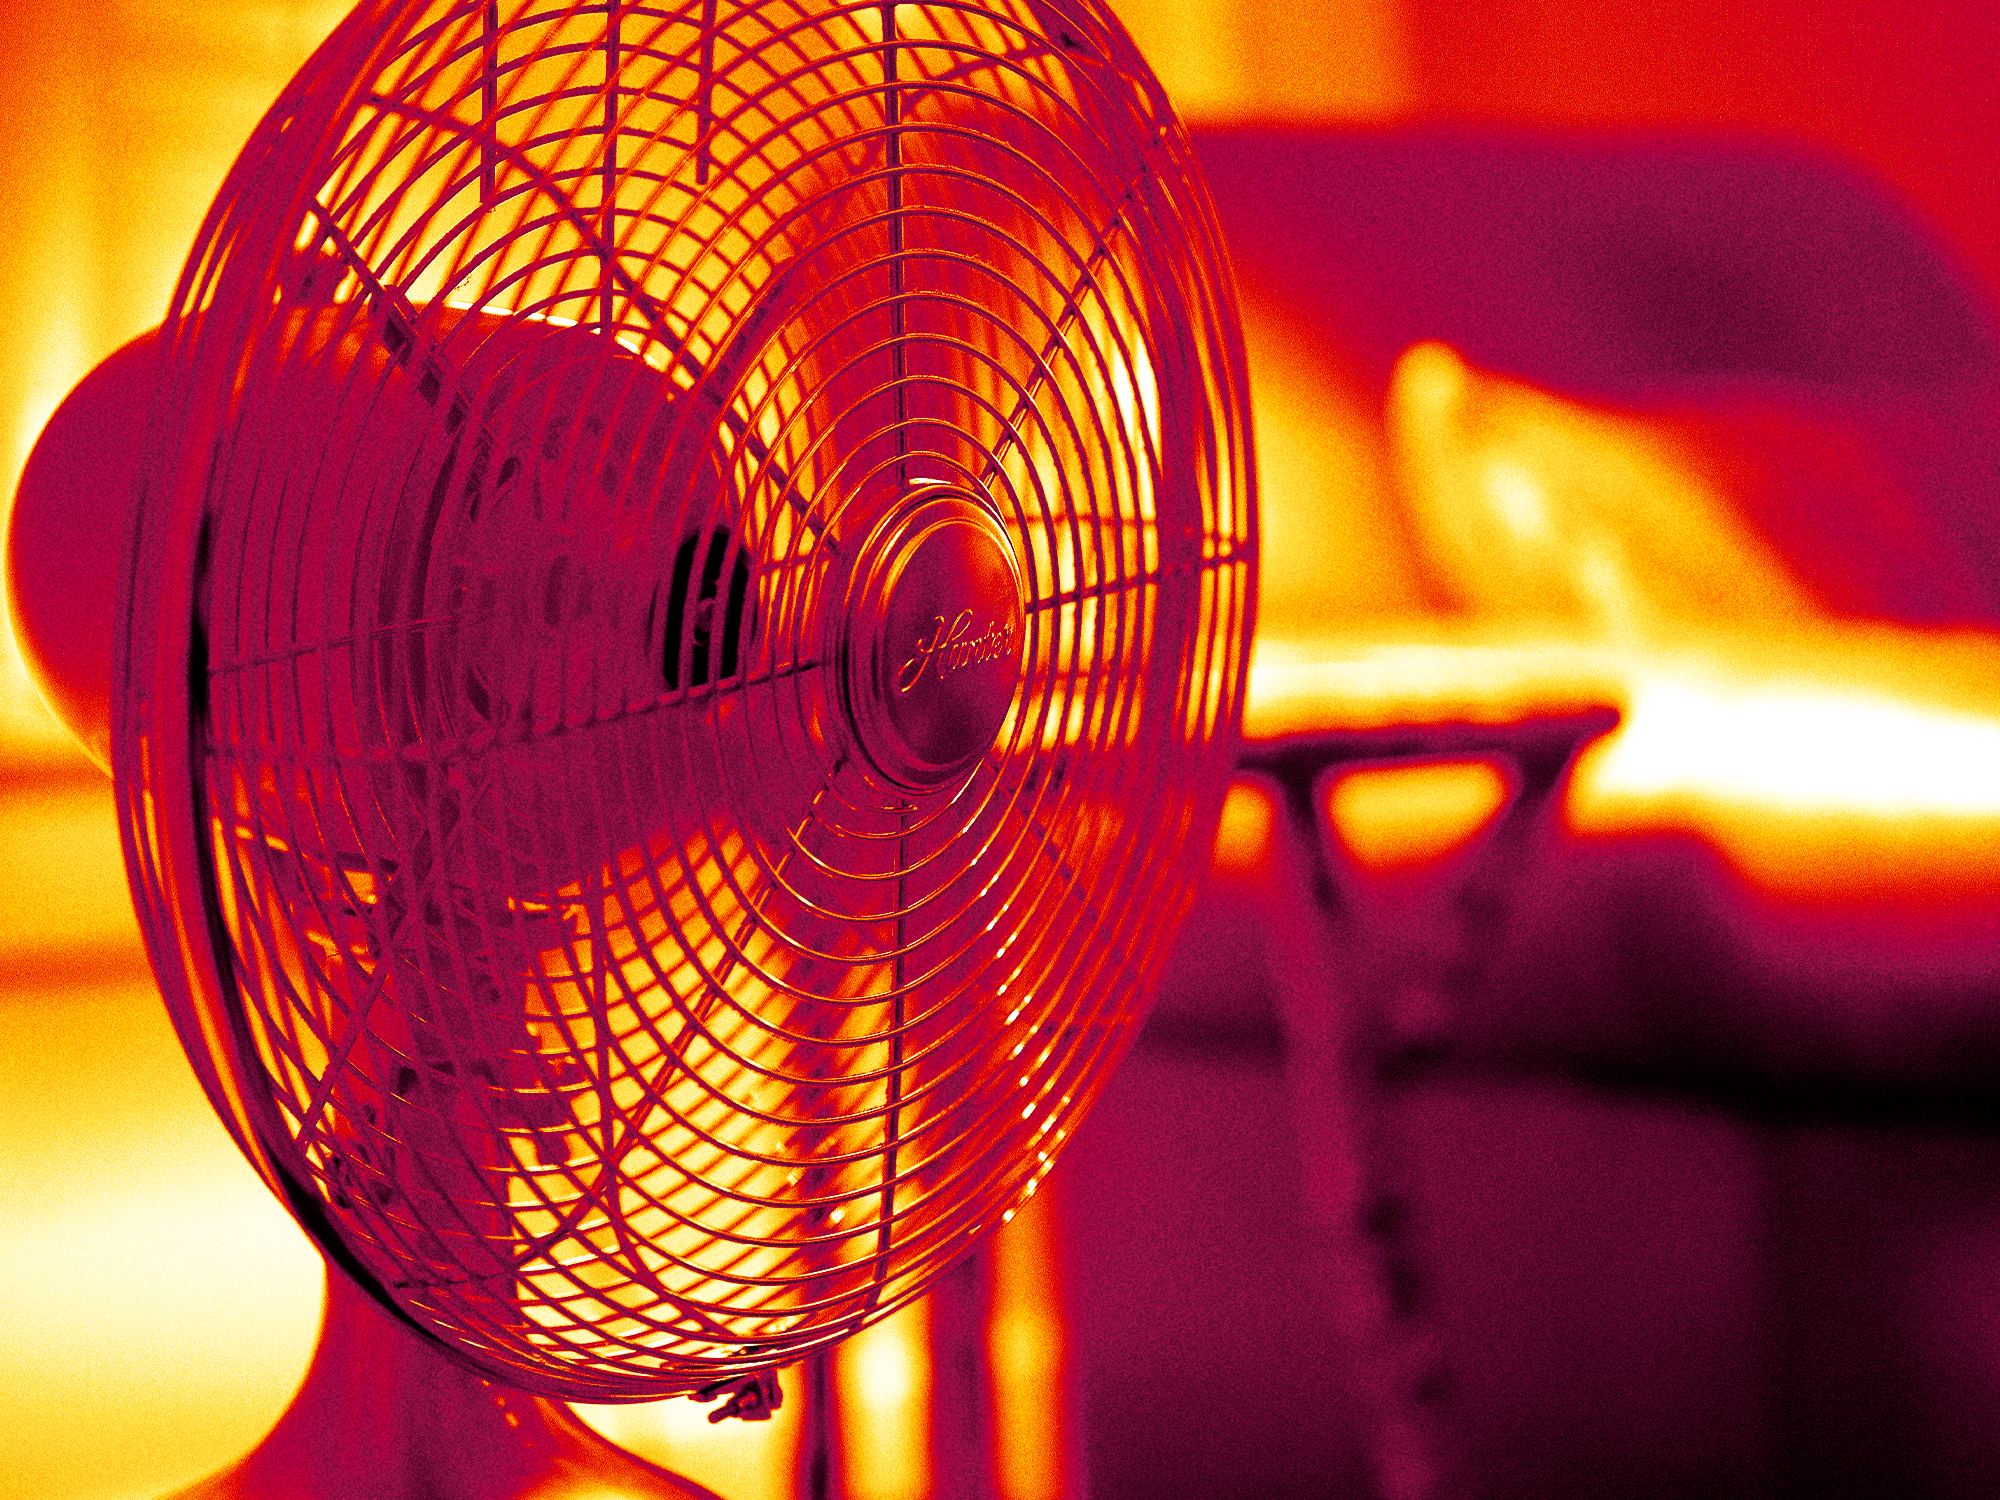 Electric fan in front of a bed, against red and orange background showing heat